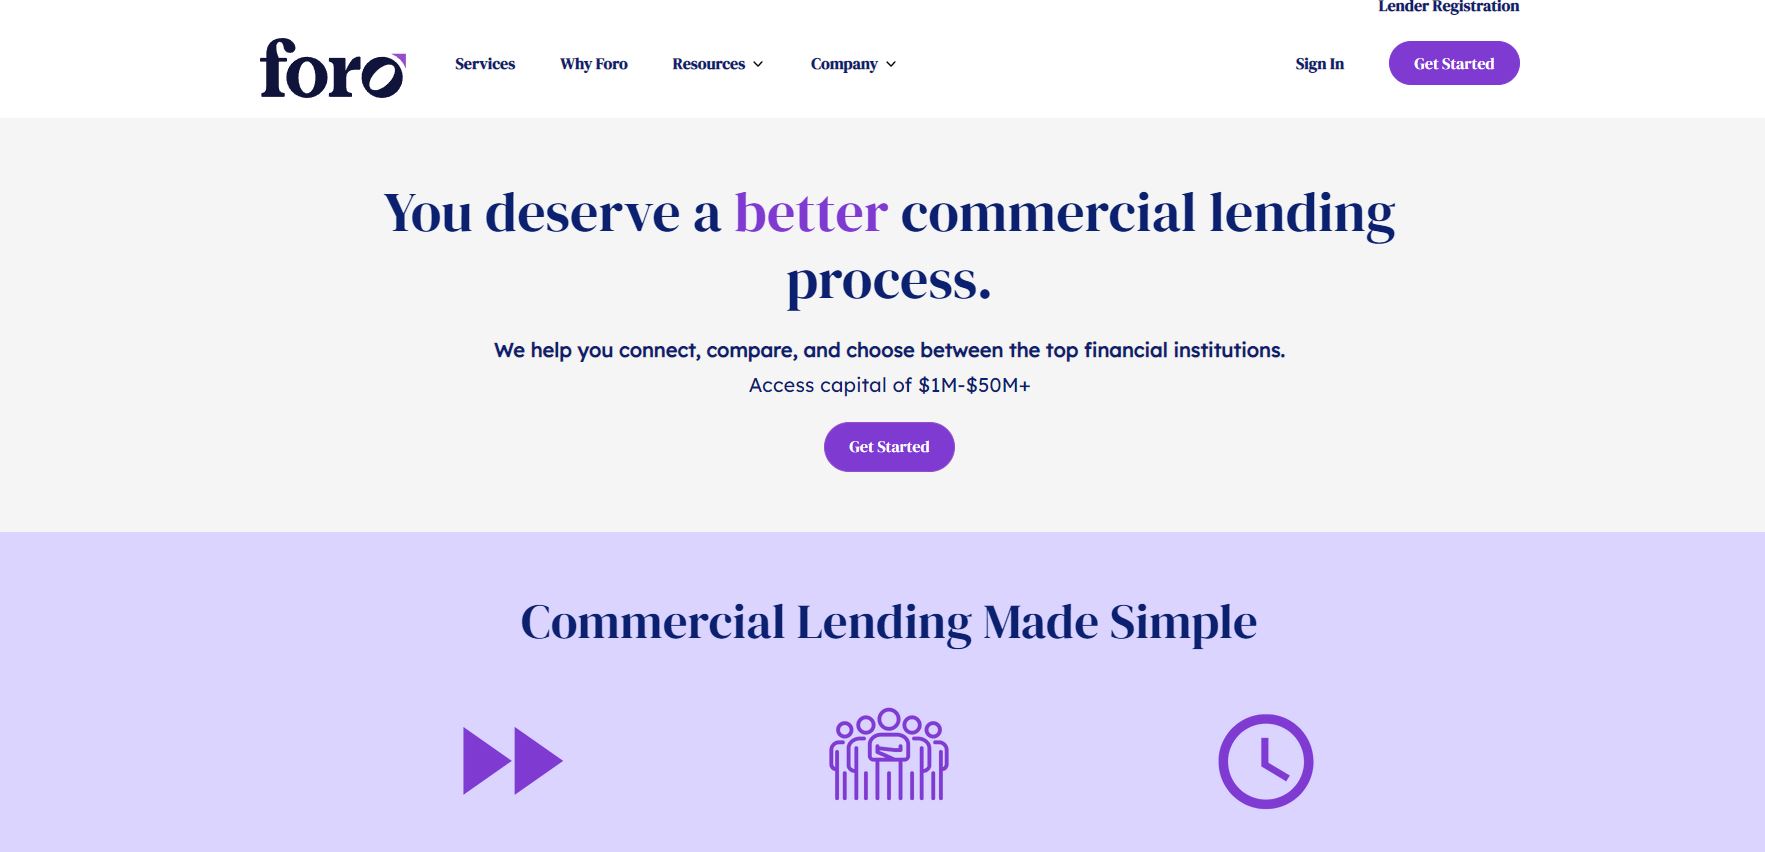 Foro, this innovative financial services startup has raised $4 million in Series A funding